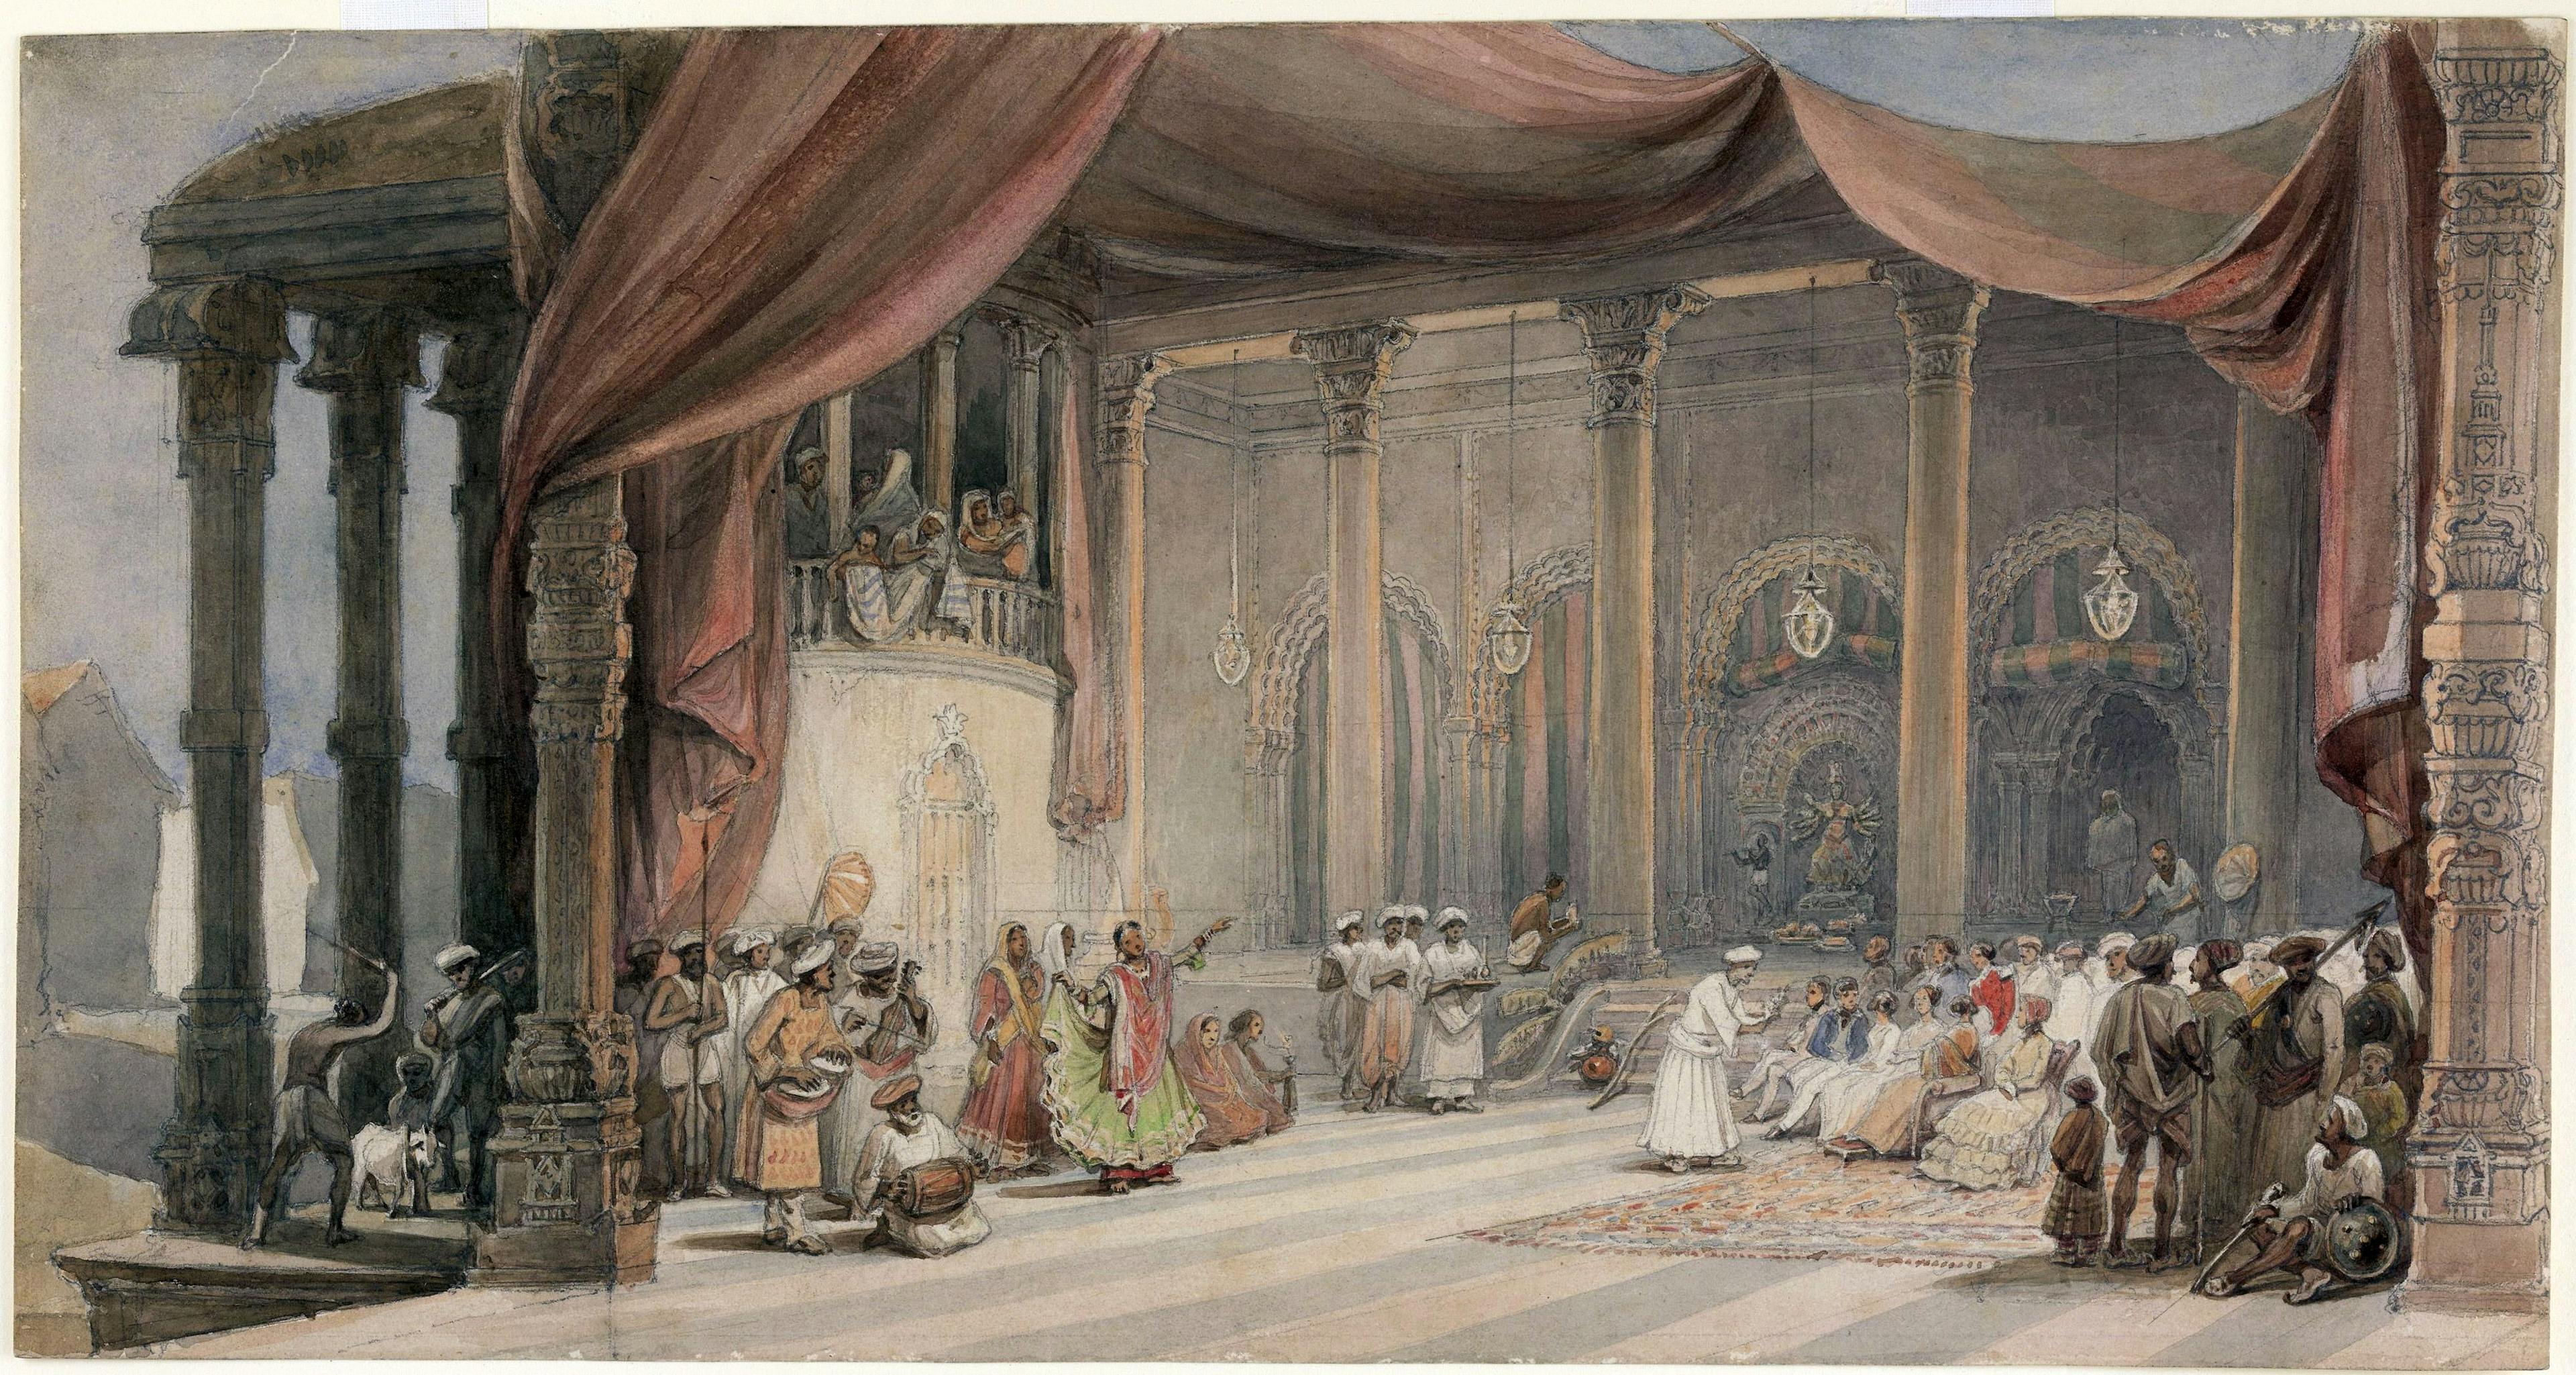 A depiction of celebrations inside a house during Durga Puja in Calcutta, West Bengal, India, where Europeans are being entertained. The artist William Prinsep (1794–1874) was a merchant with the Calcutta firm of Palmer &amp; Company